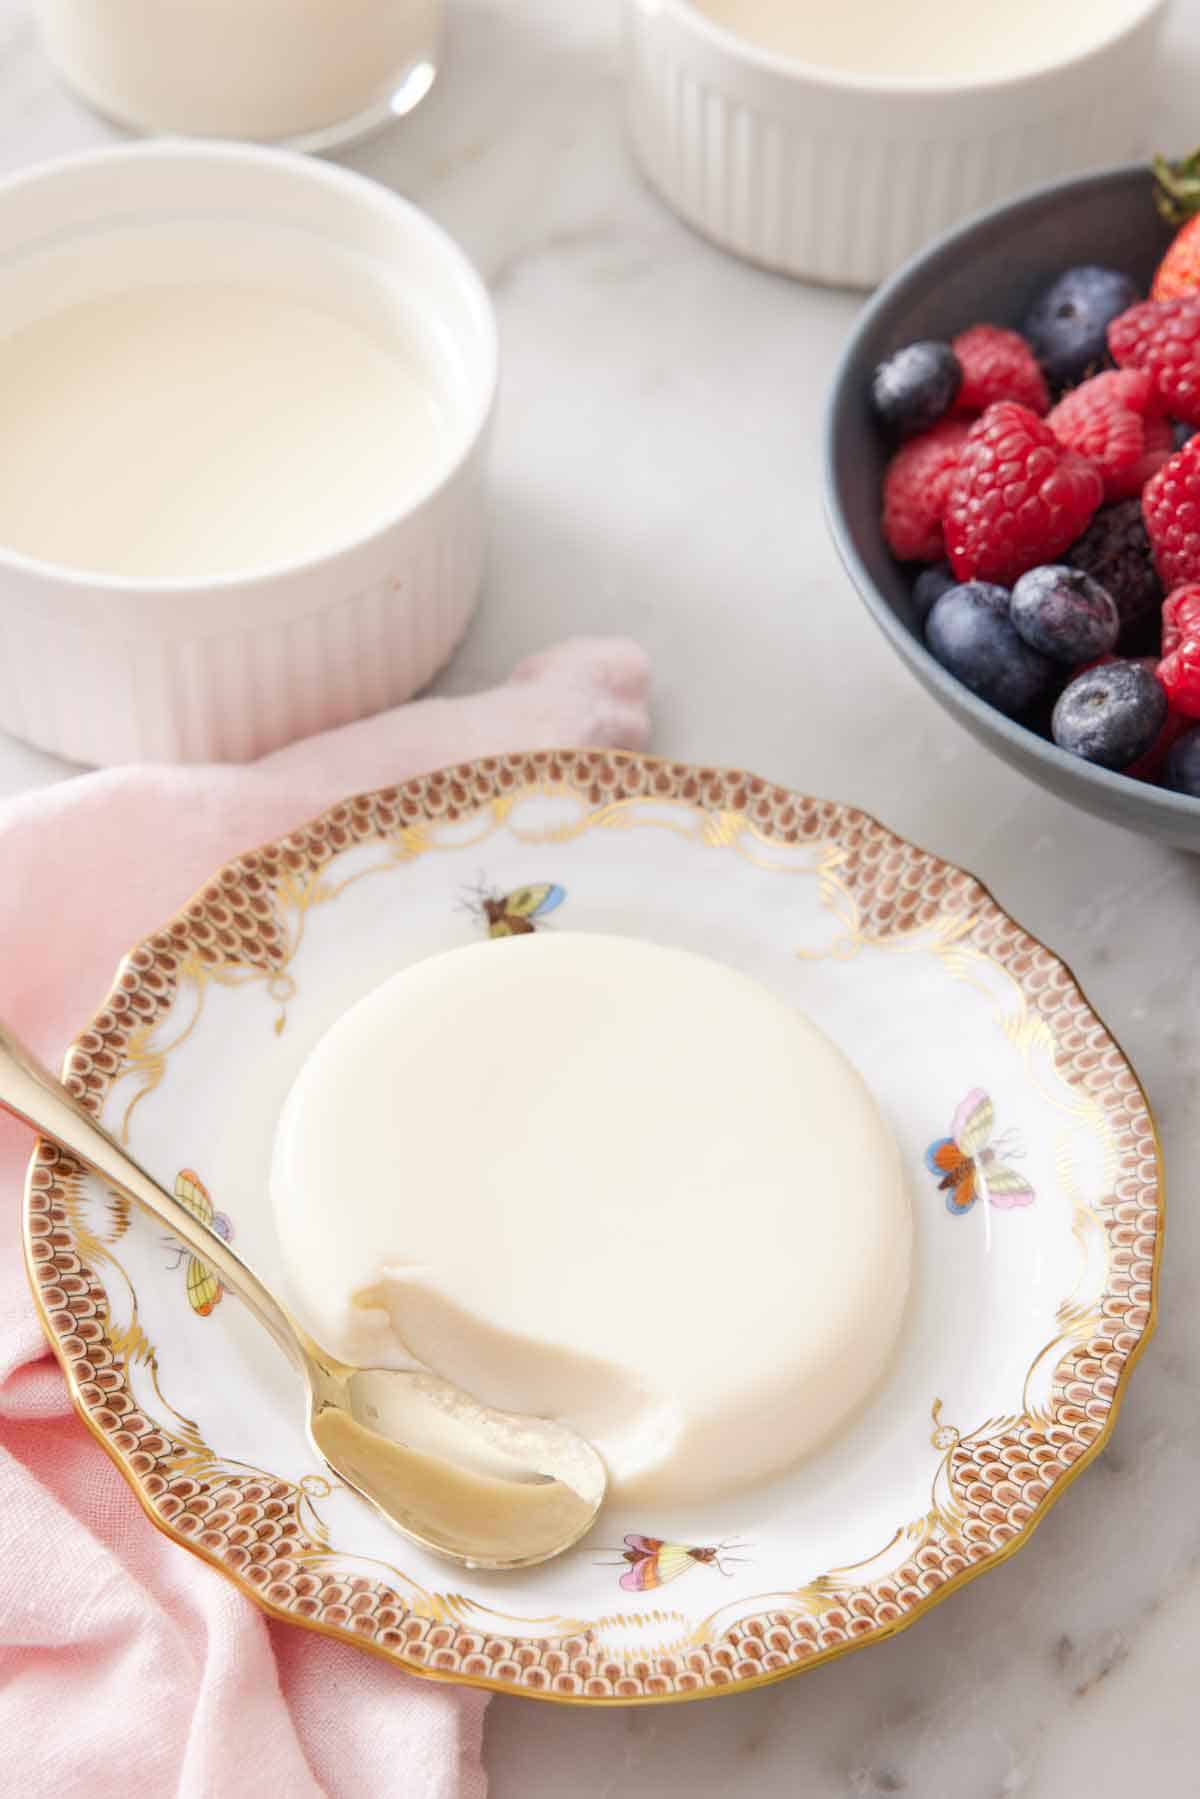 A plate with a serving of panna cotta with a spoon in front of a bite taken.